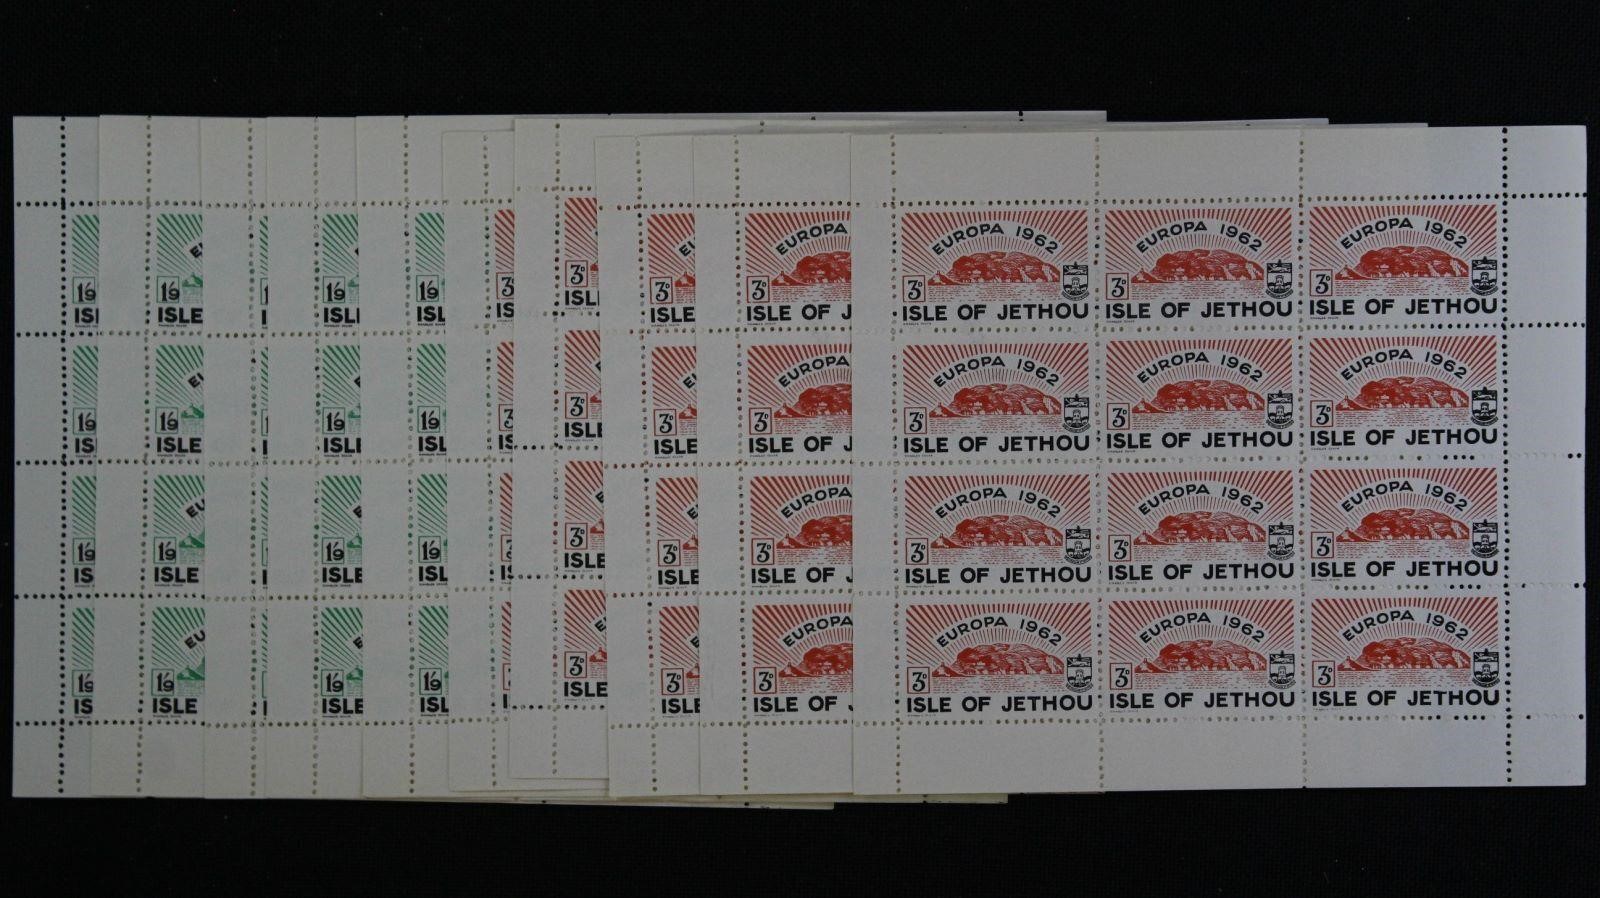 May 16th, 2021 Weekly Stamps & Collectibles Auction